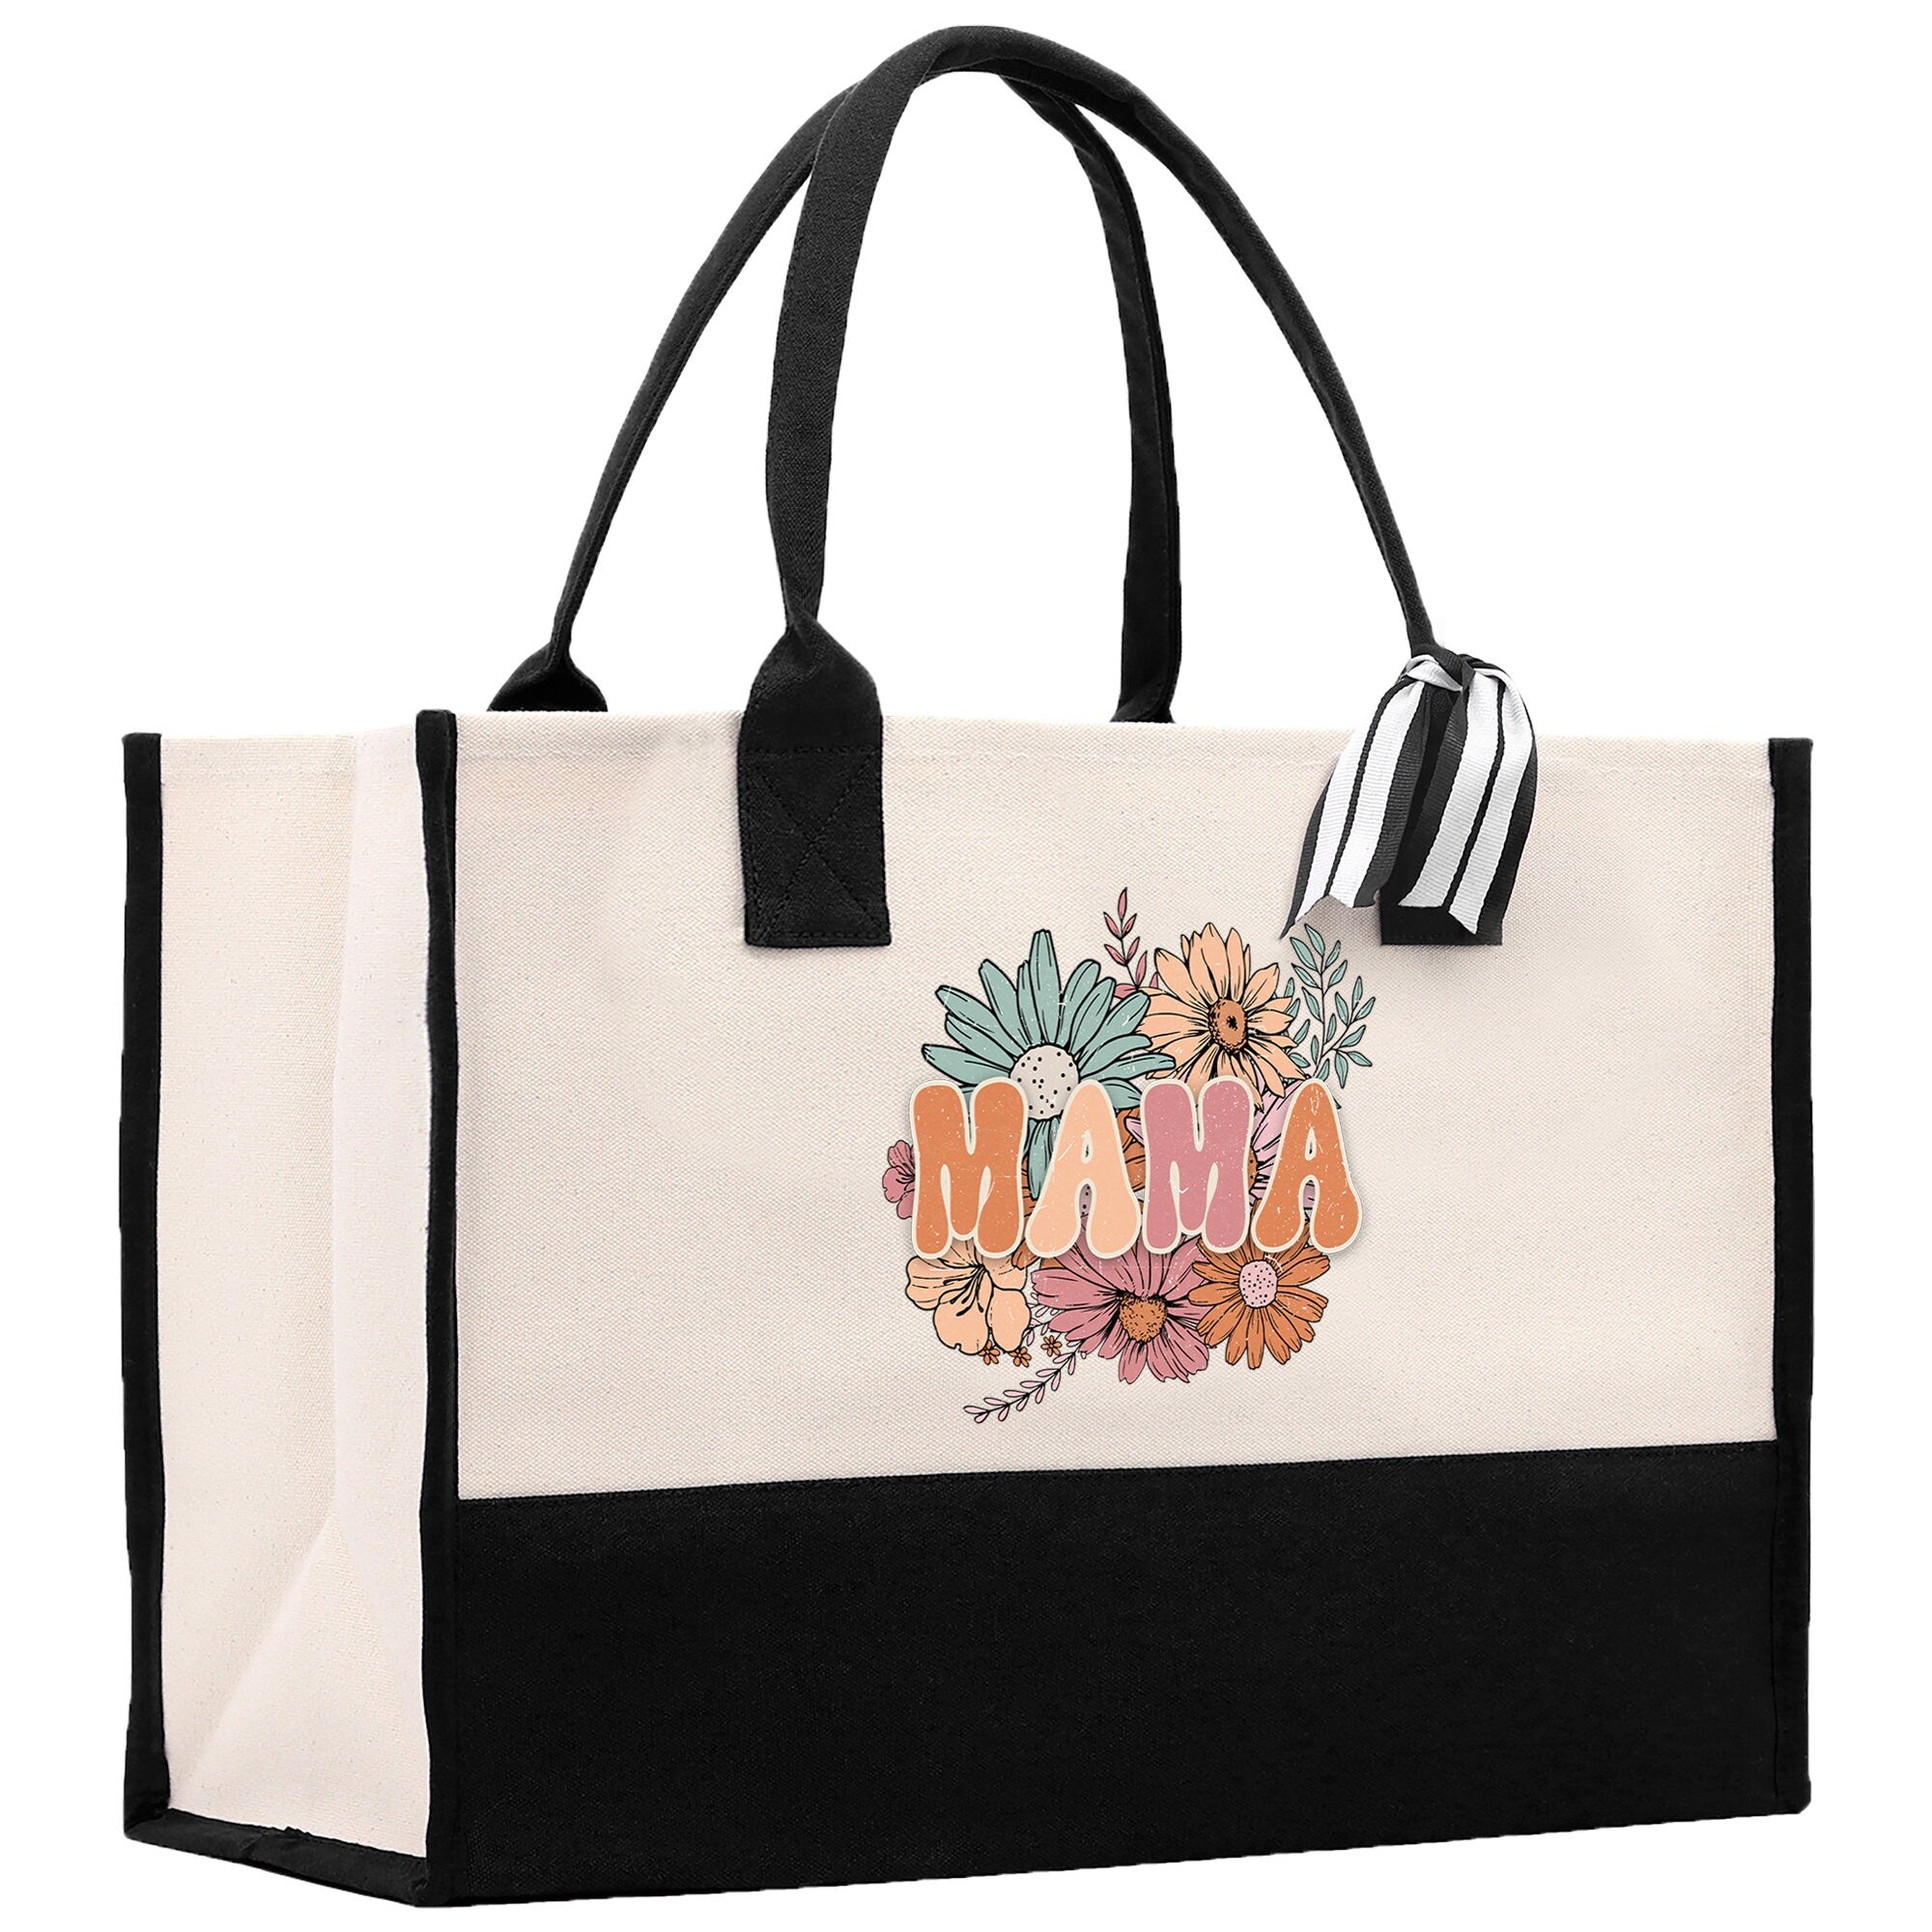 a black and white tote bag with the word mama printed on it